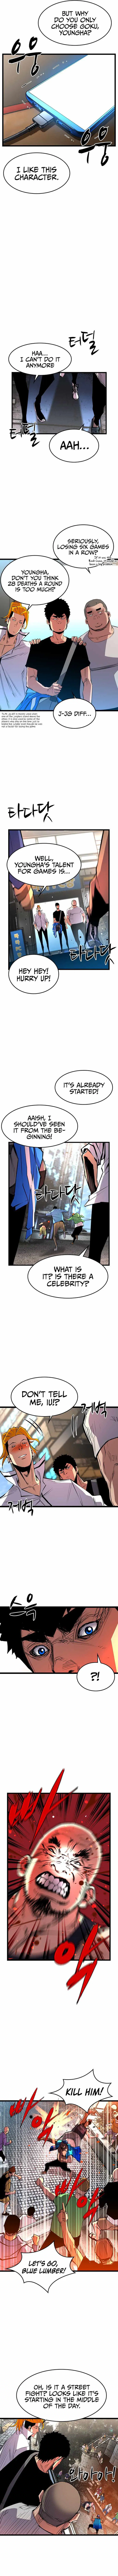 Hanlim Gym Chapter 82 page 8